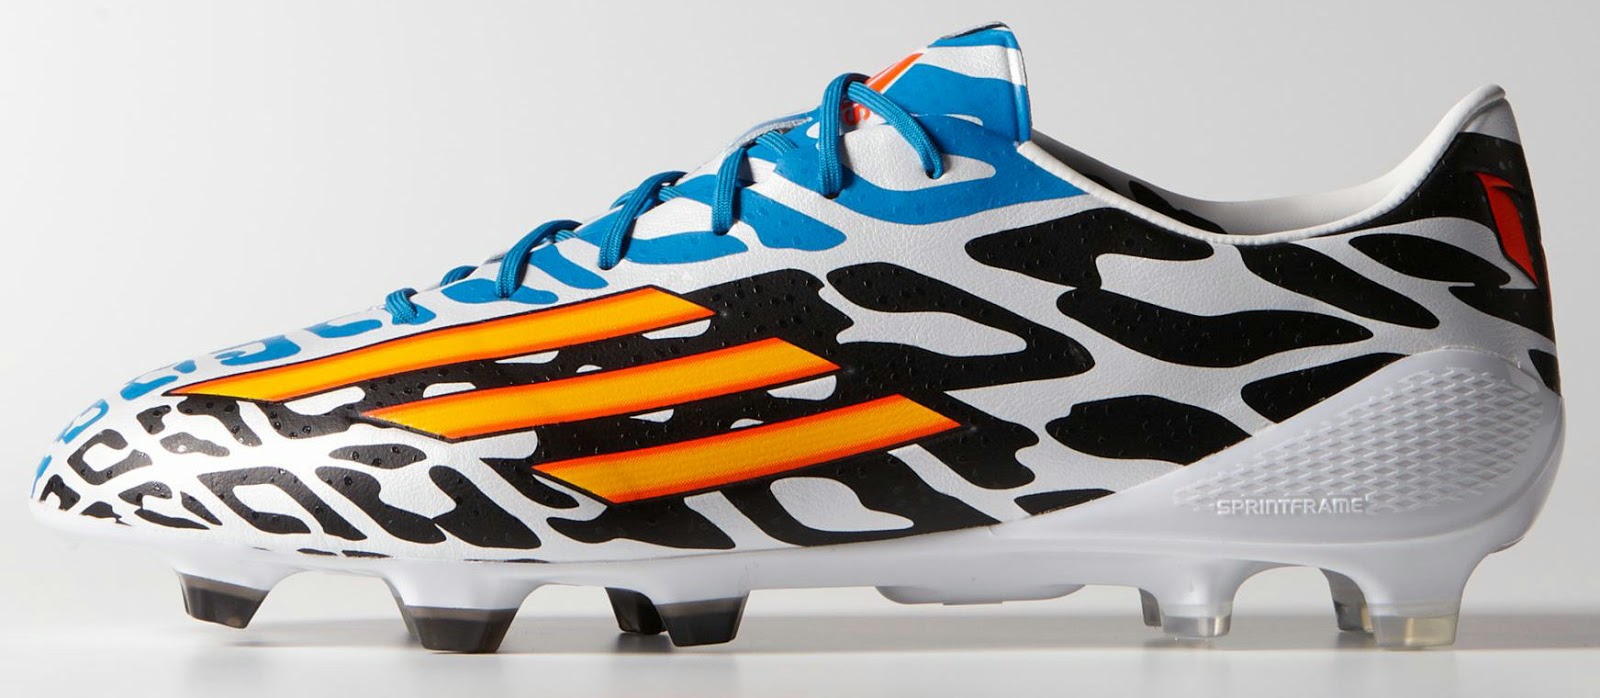 Adidas Adizero Messi 2014 World Cup Battle Pack Released Footy Headlines